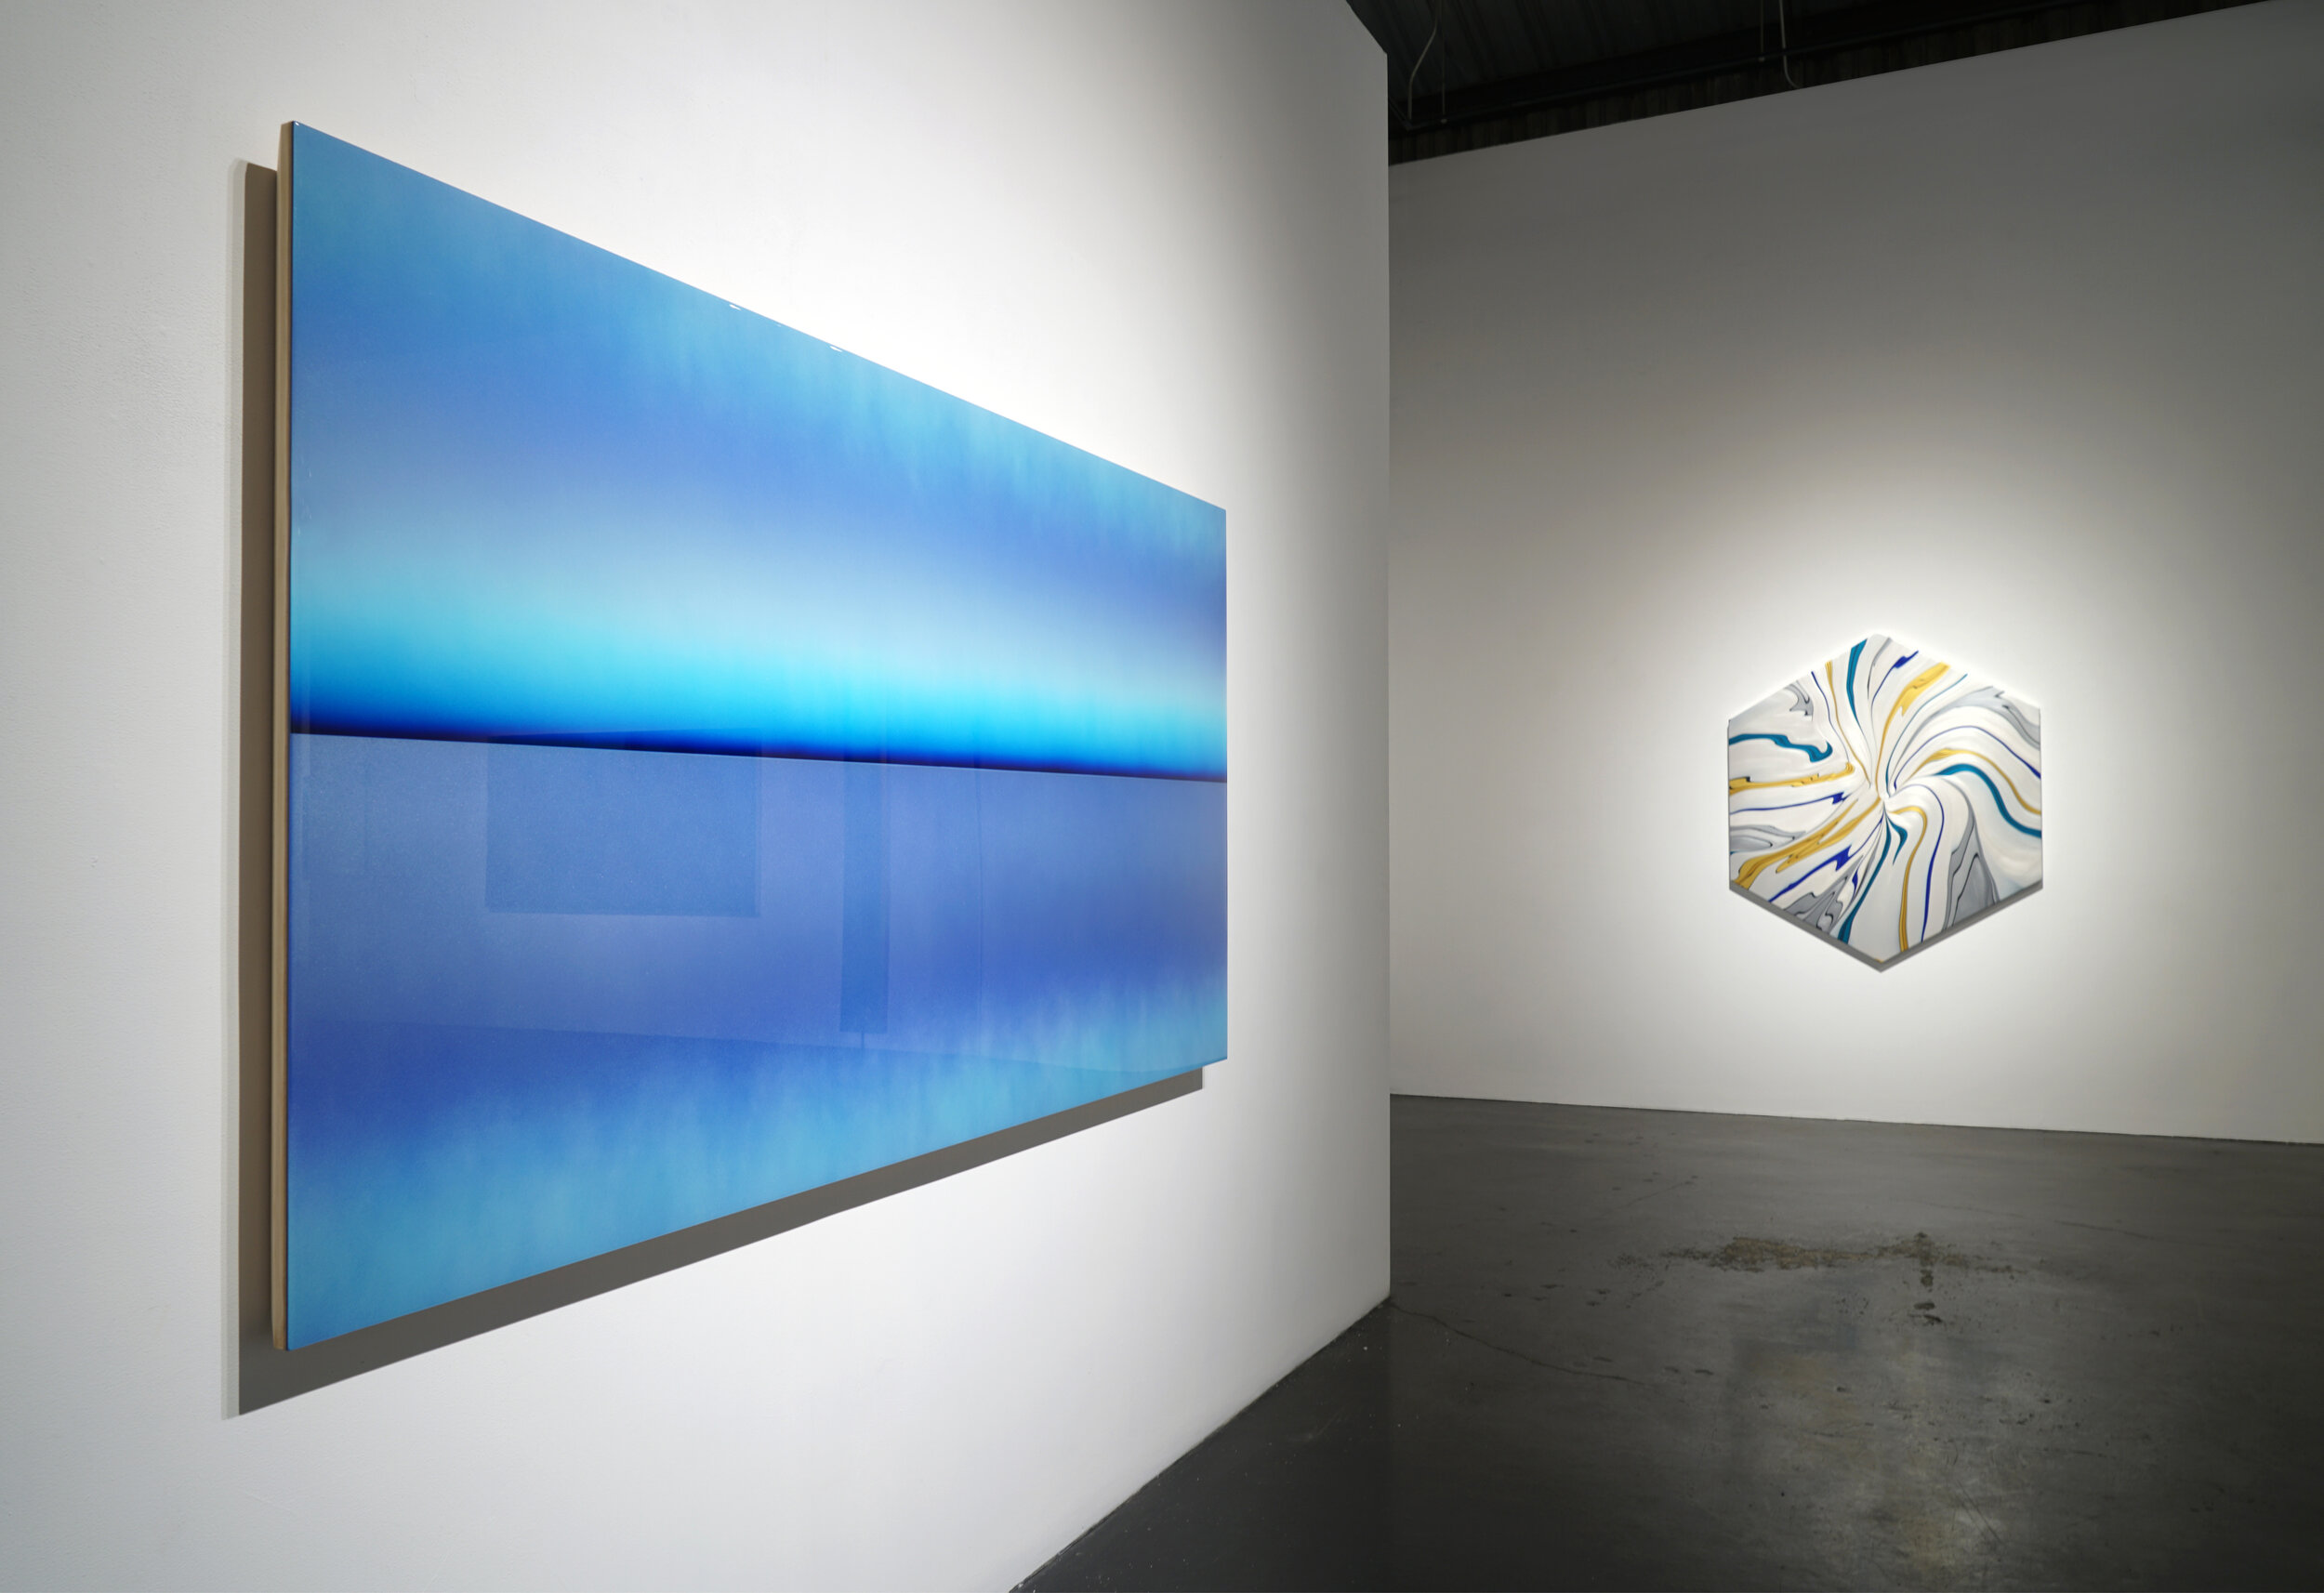  Casper Brindle, Middle Pacific, 2020, acrylic, automotive paint and resin on panel, 48" x 96".    Andy Moses, Geodynamics 1216, 2020 acrylic on canvas over hexagonal shaped wood pale, 60” x 52” 